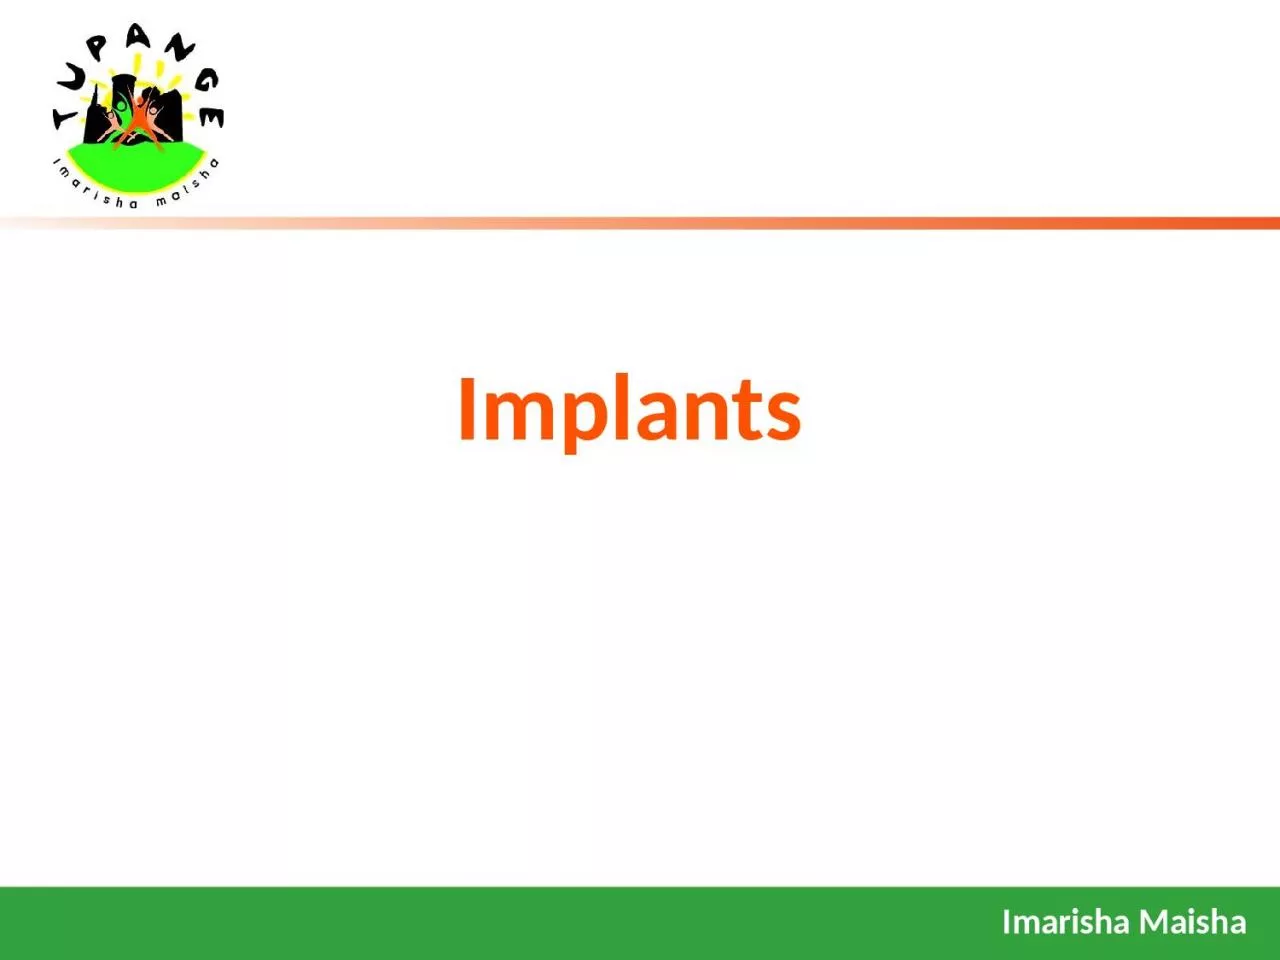 Implants  What are they